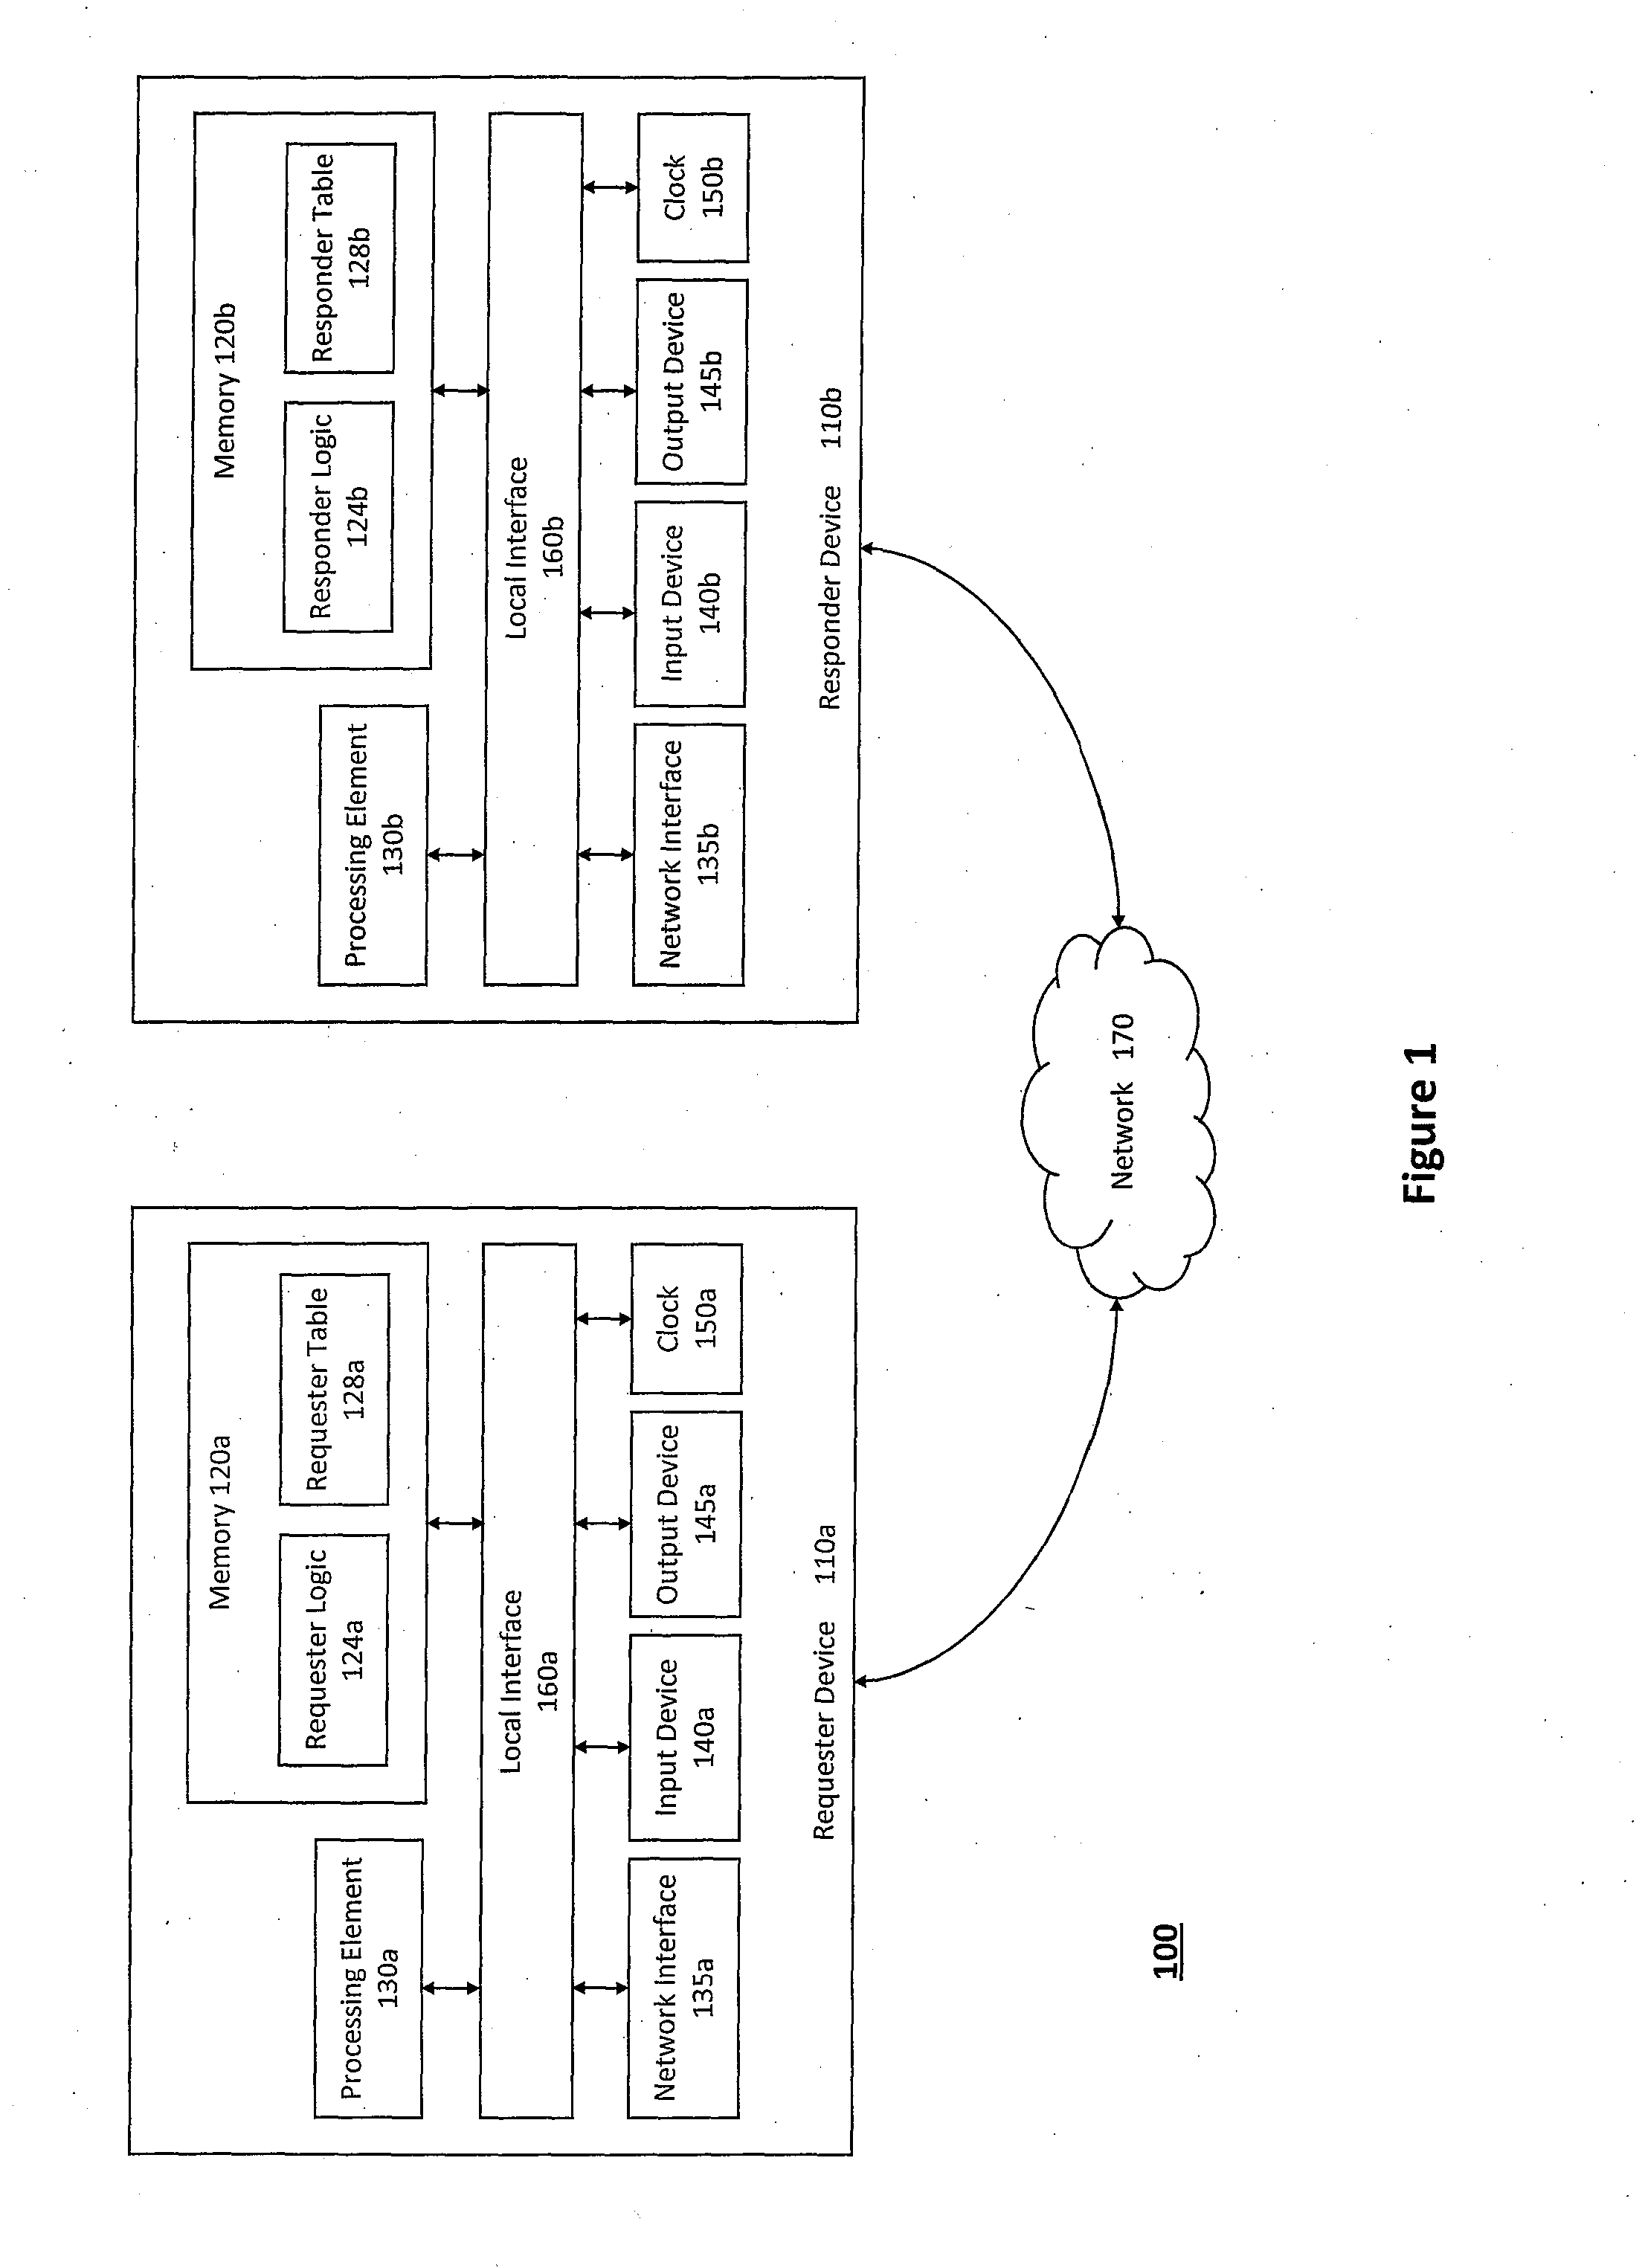 System and method for providing unified transport and security protocols